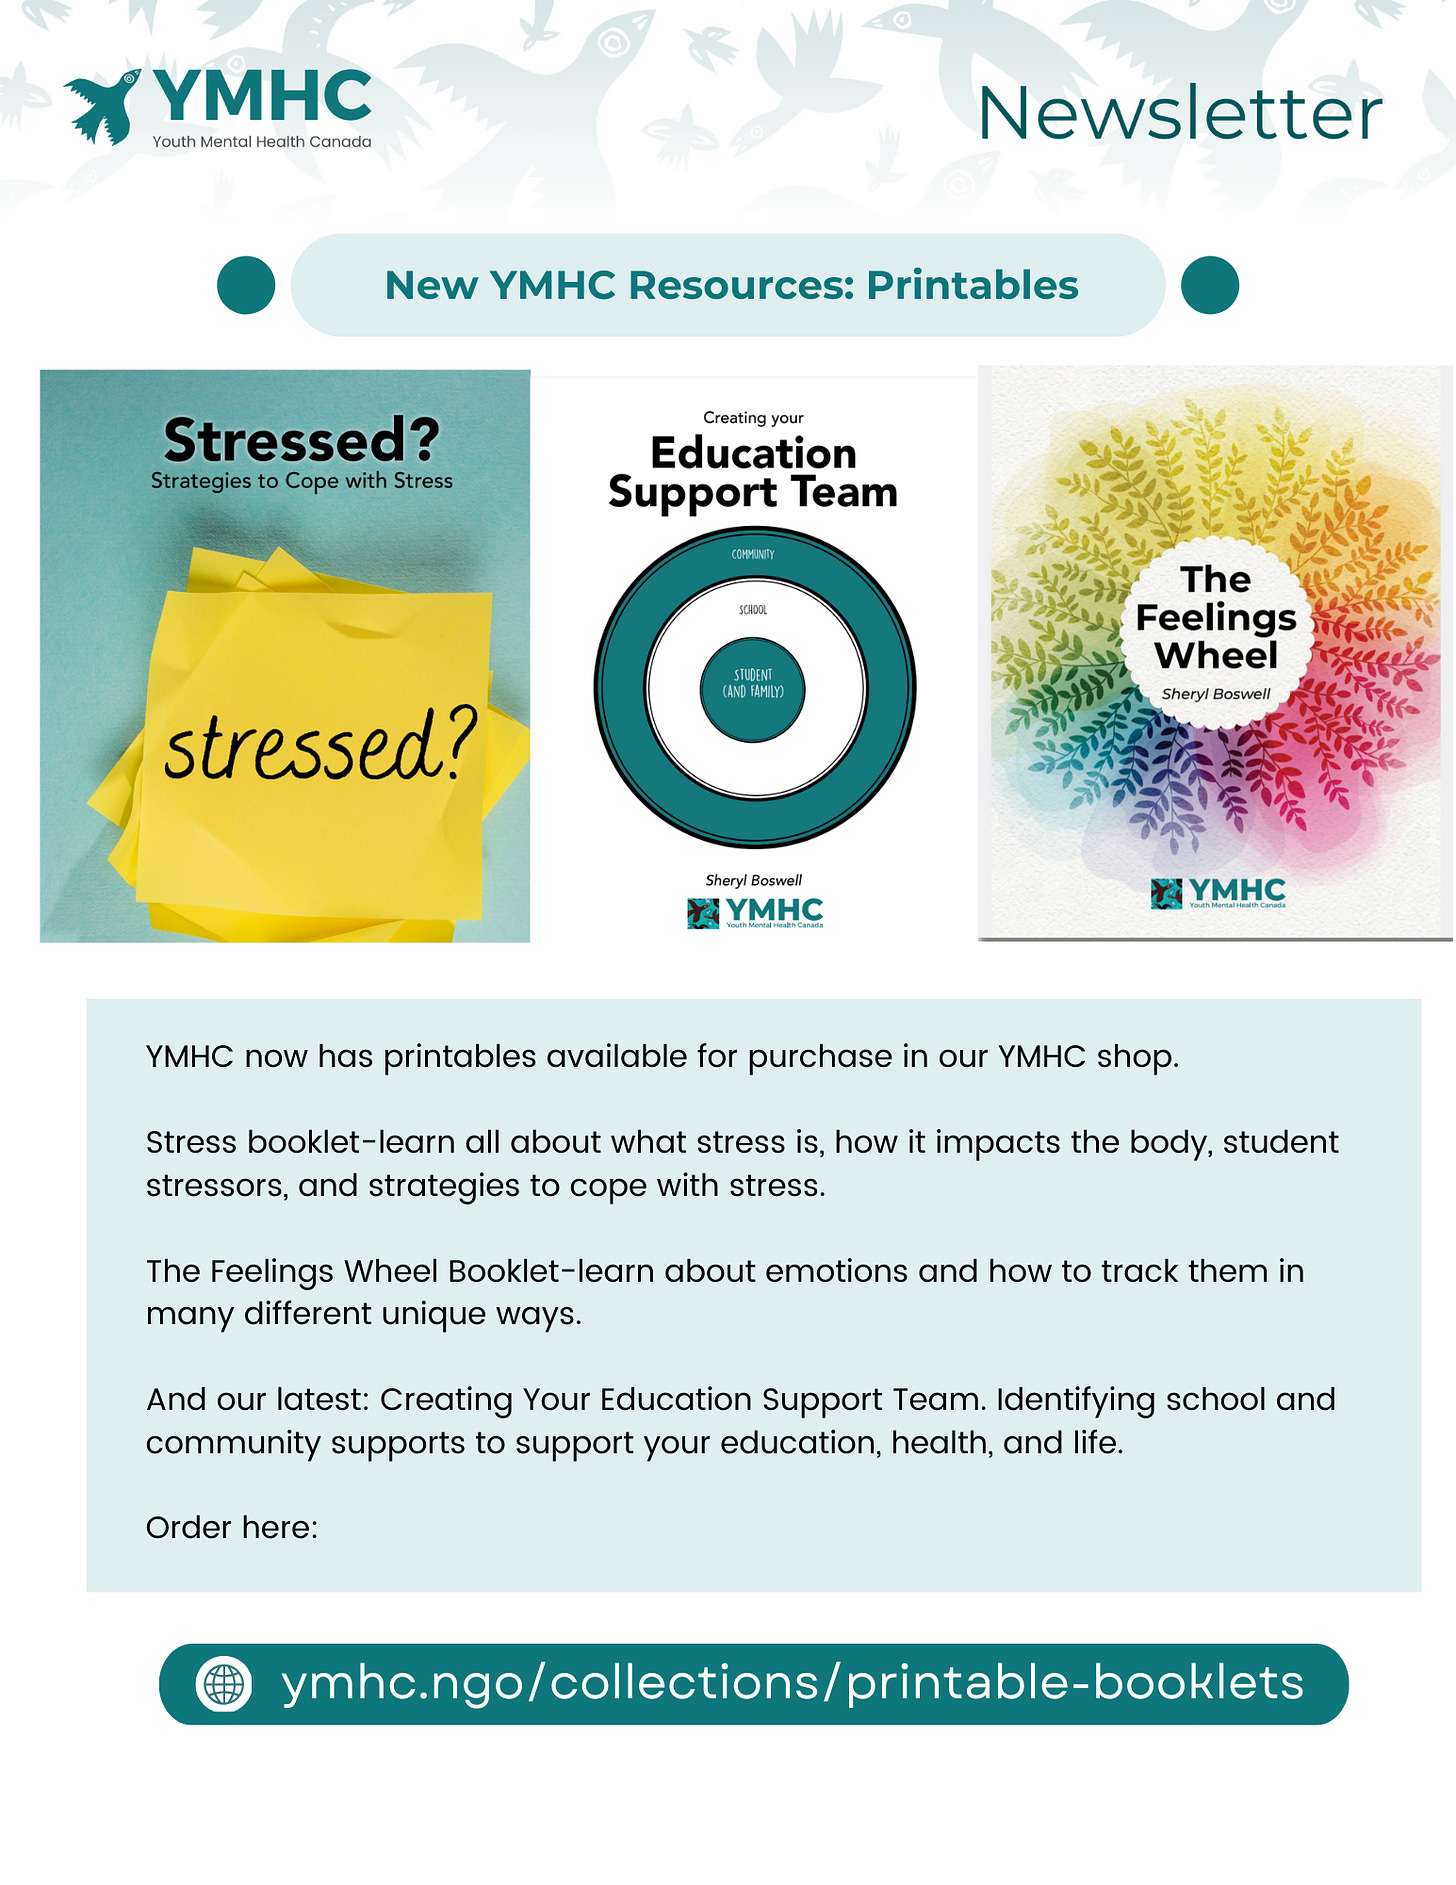 New YMHC Resources: Printables